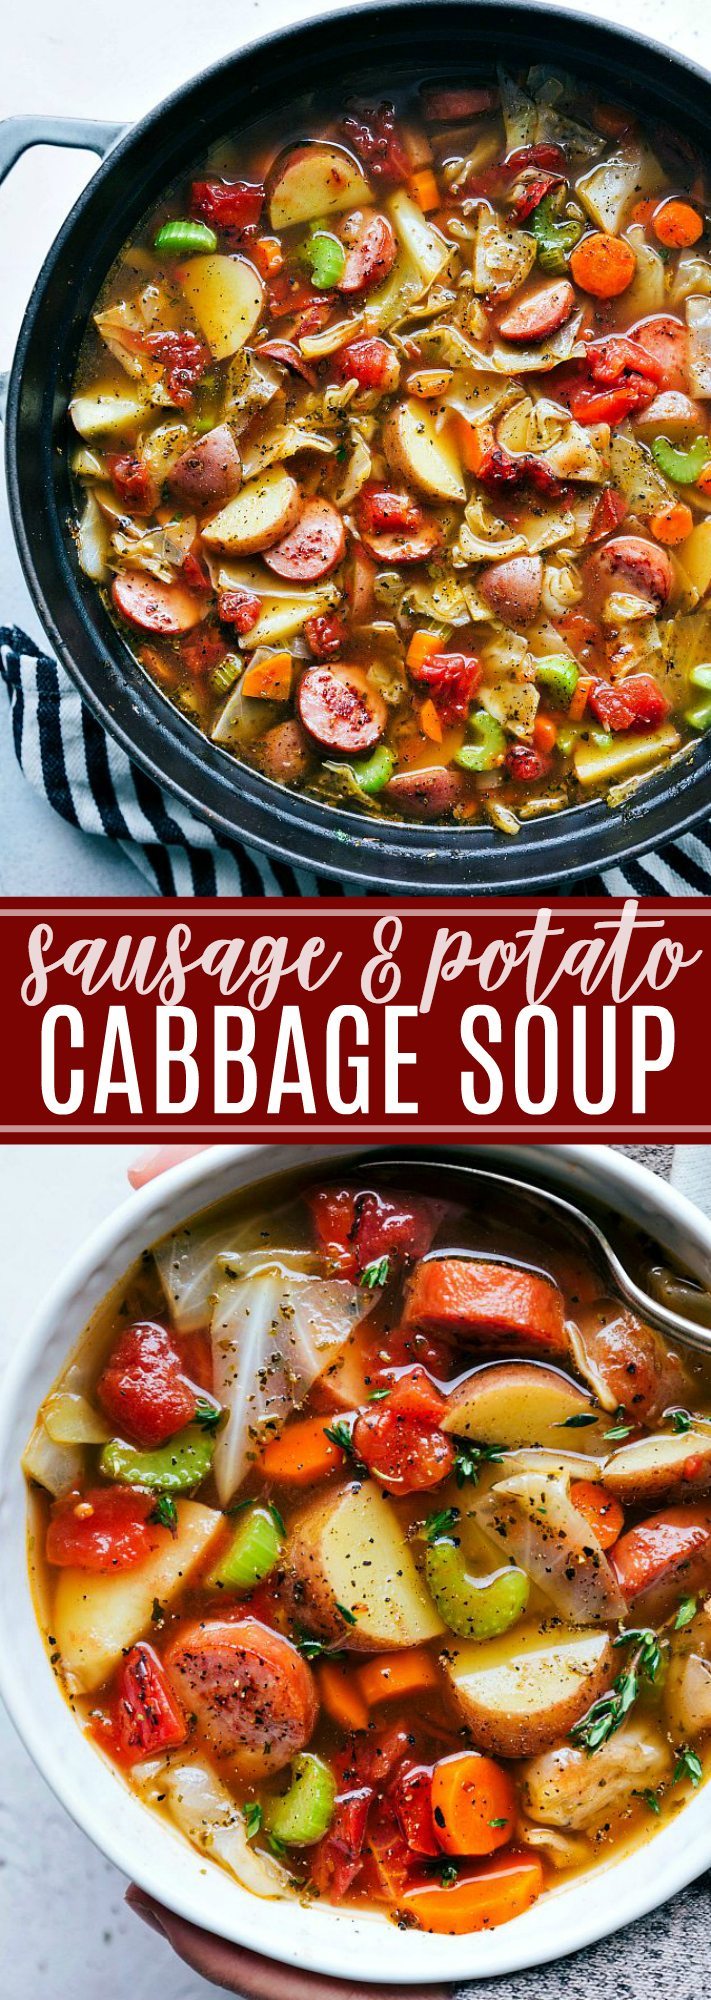 A thick and hearty sausage, potato, and cabbage soup; a healthy recipe that is packed with flavorful ingredients! chelseasmessyapron.com | #cabbage #soup #sausage #healthy #easy #quick #cabbagesoup #celery #carrots #potatoes